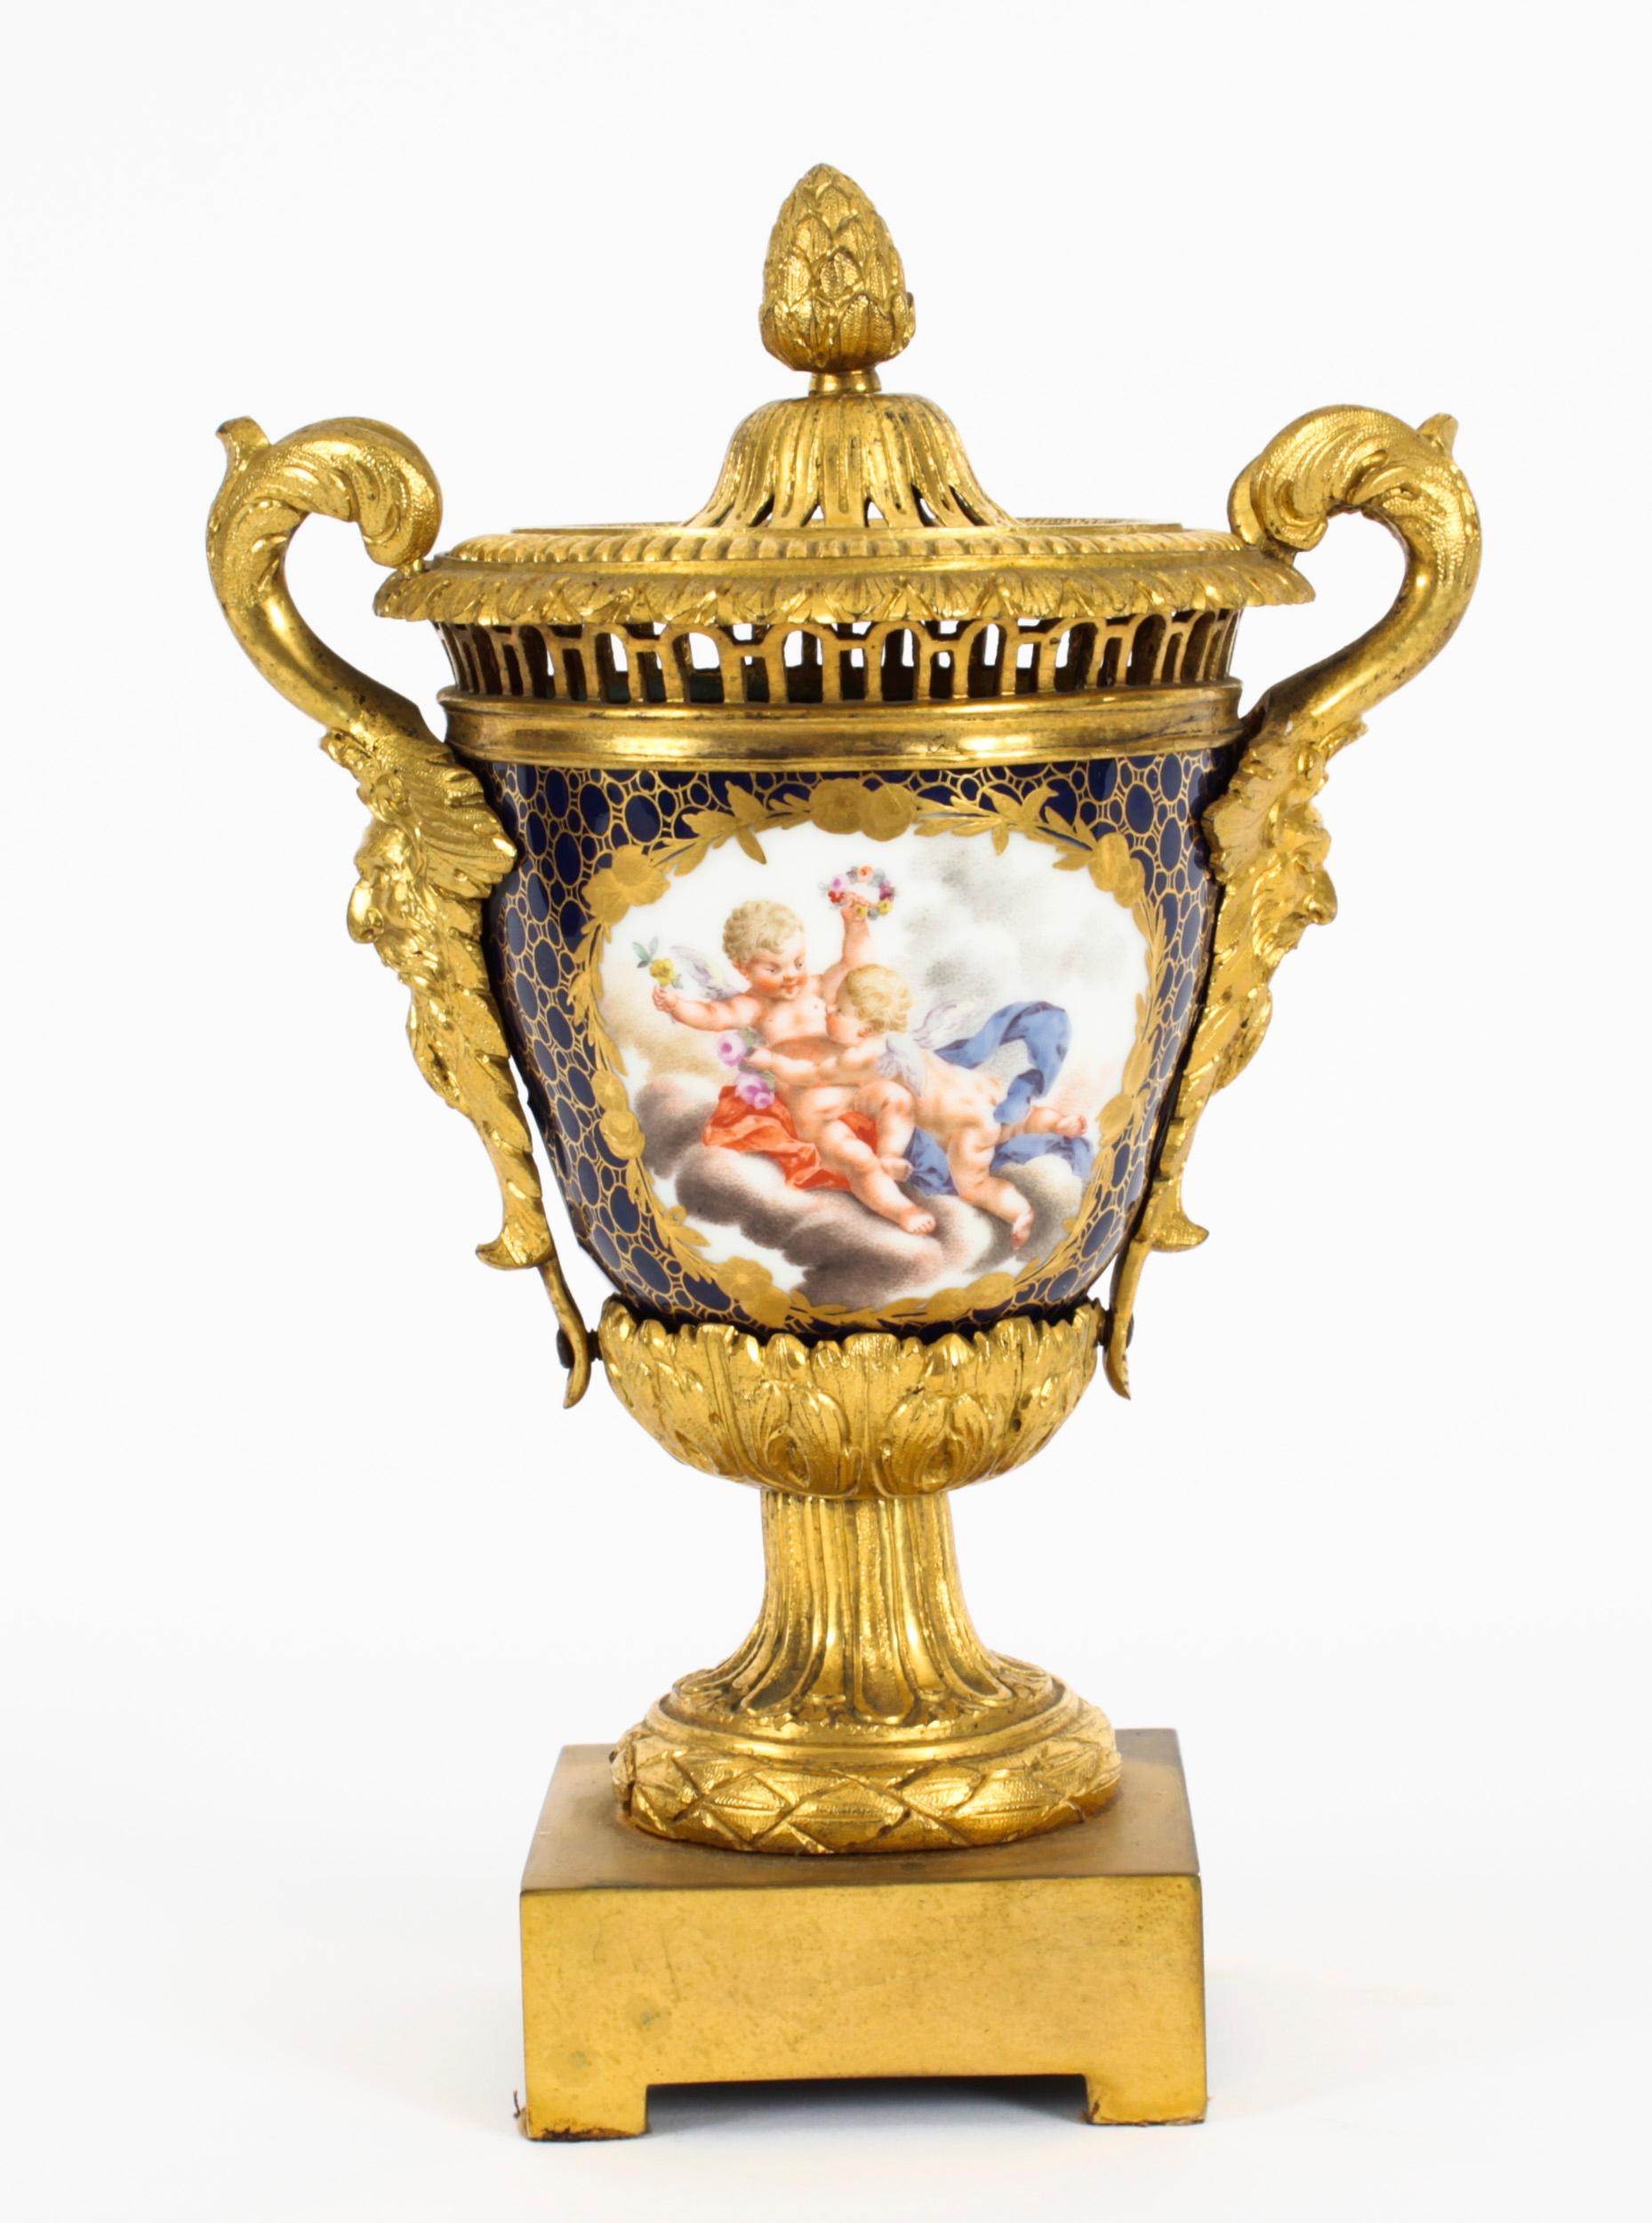 A superb German porcelain ormolu mounted vase, possibly Meissen, Circa 1850 in date.
 
It has ormolu masque handles with a pierced rim and lid, the lid with an acorn finial. The navy blue body skillfully hand painted with playful cherubs and